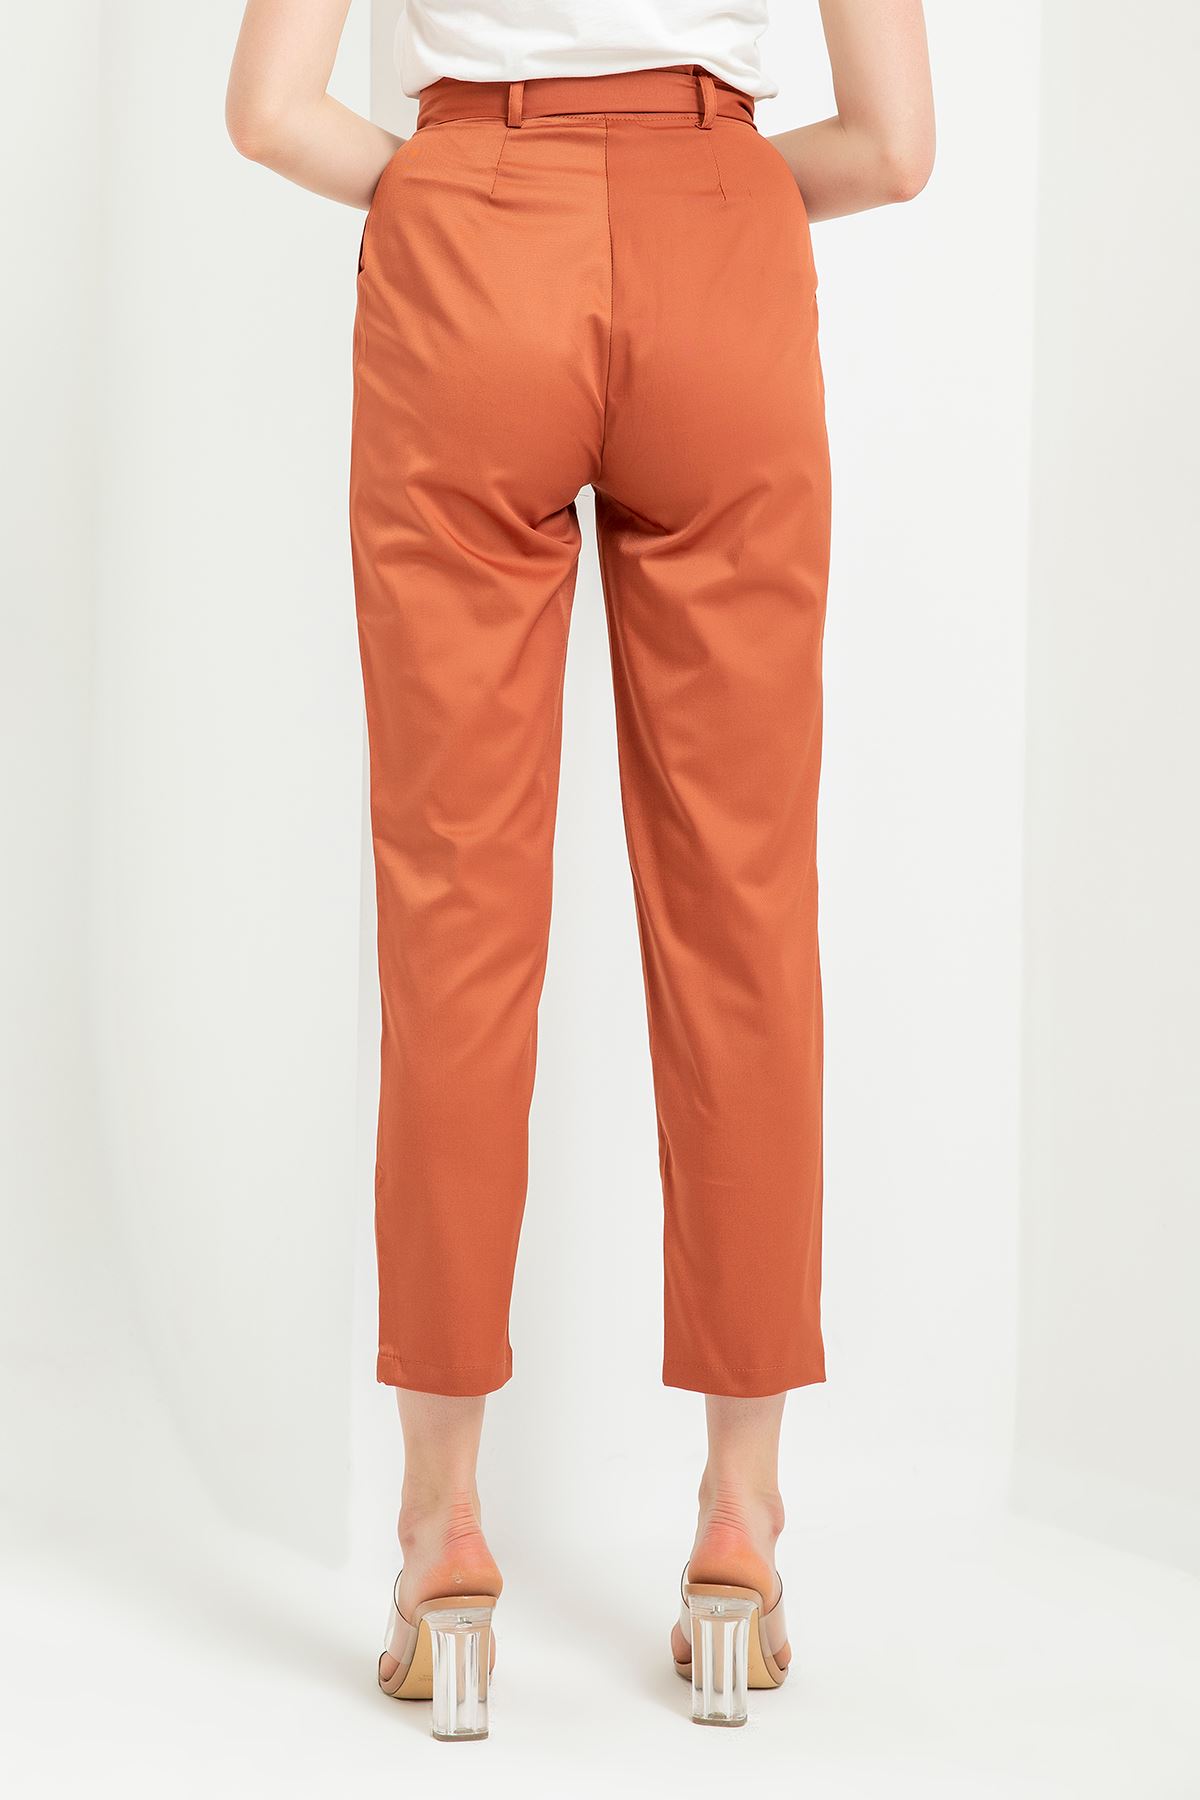 Woven Fabric Ankle Length Carrot Style Belted Women'S Trouser - Brick 